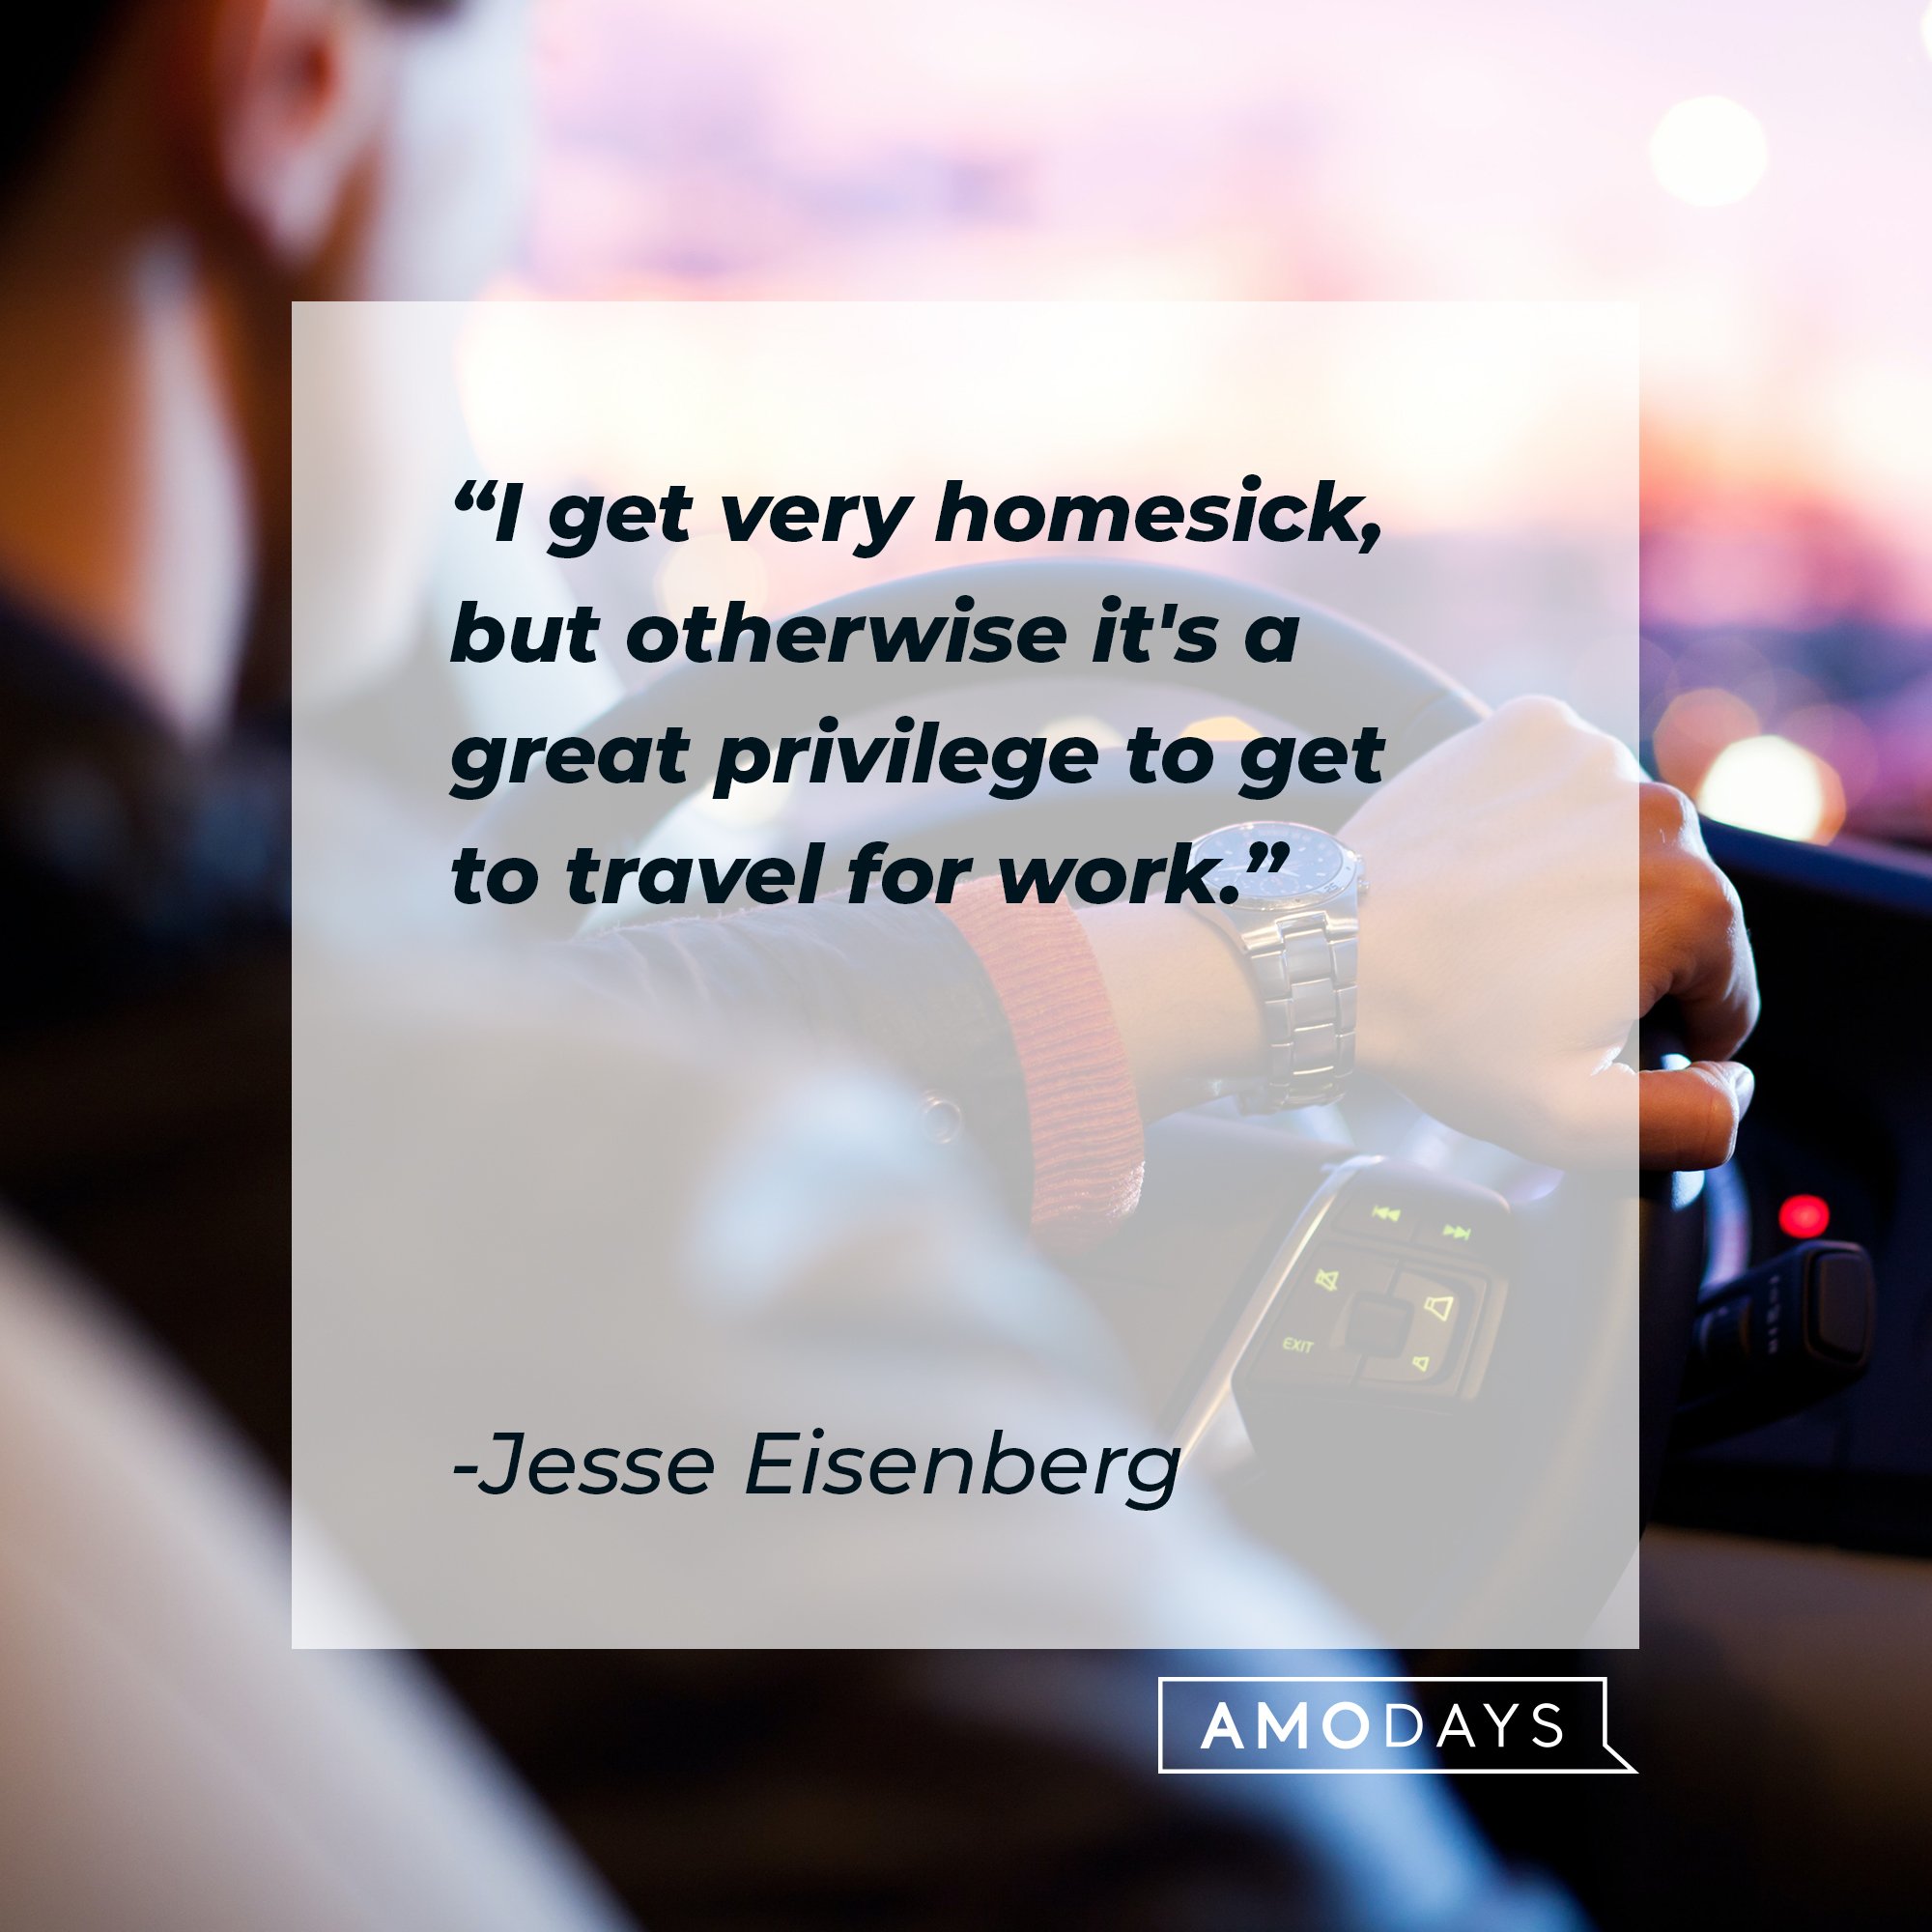 Jesse Eisenberg's quote: "I get very homesick, but otherwise it's a great privilege to get to travel for work." | Image: AmoDays